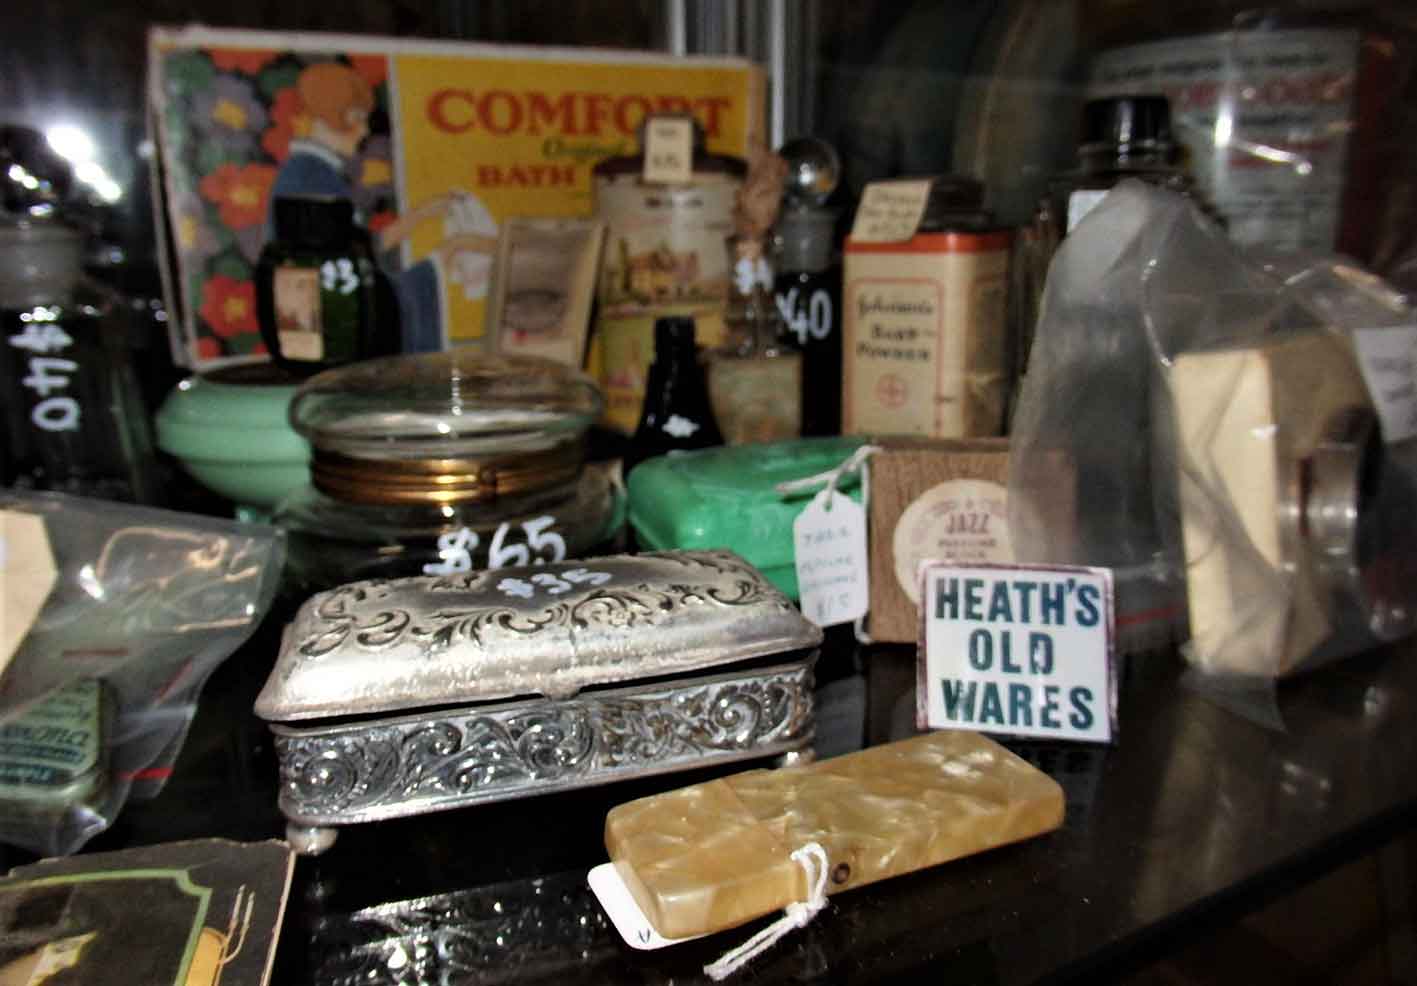 Antique and old perfume and related items for sale at Heaths Old Wares, Collectables, Antiques & Industrial Antiques, 19-21 Broadway, Burringbar NSW 2483 Ph 0266771181 open 7 days